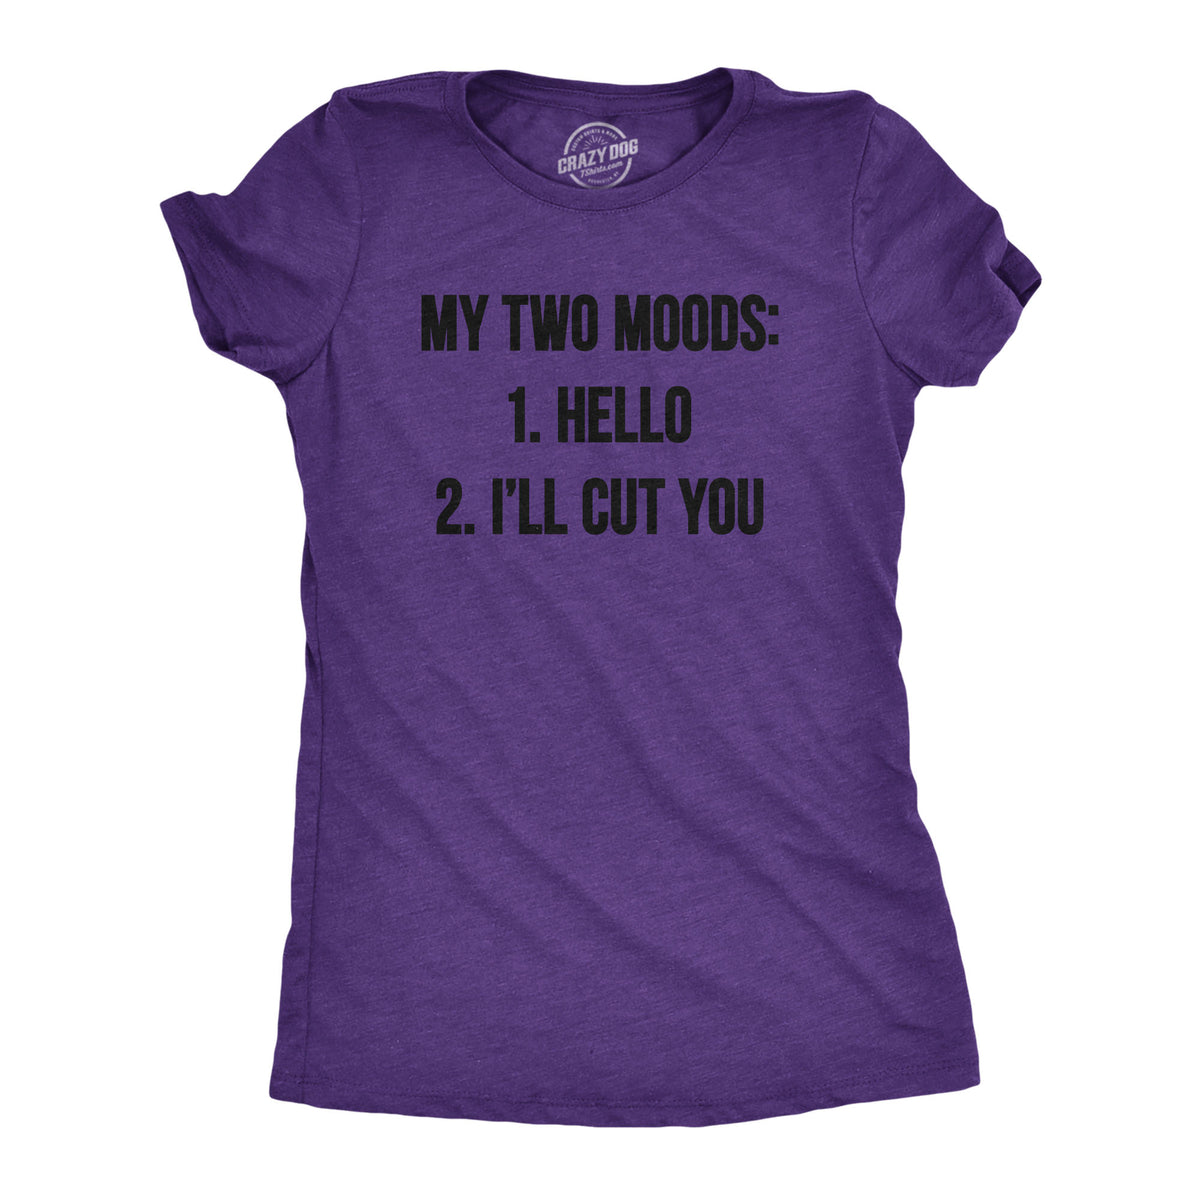 Funny Heather Purple My Two Moods Womens T Shirt Nerdy Introvert Tee